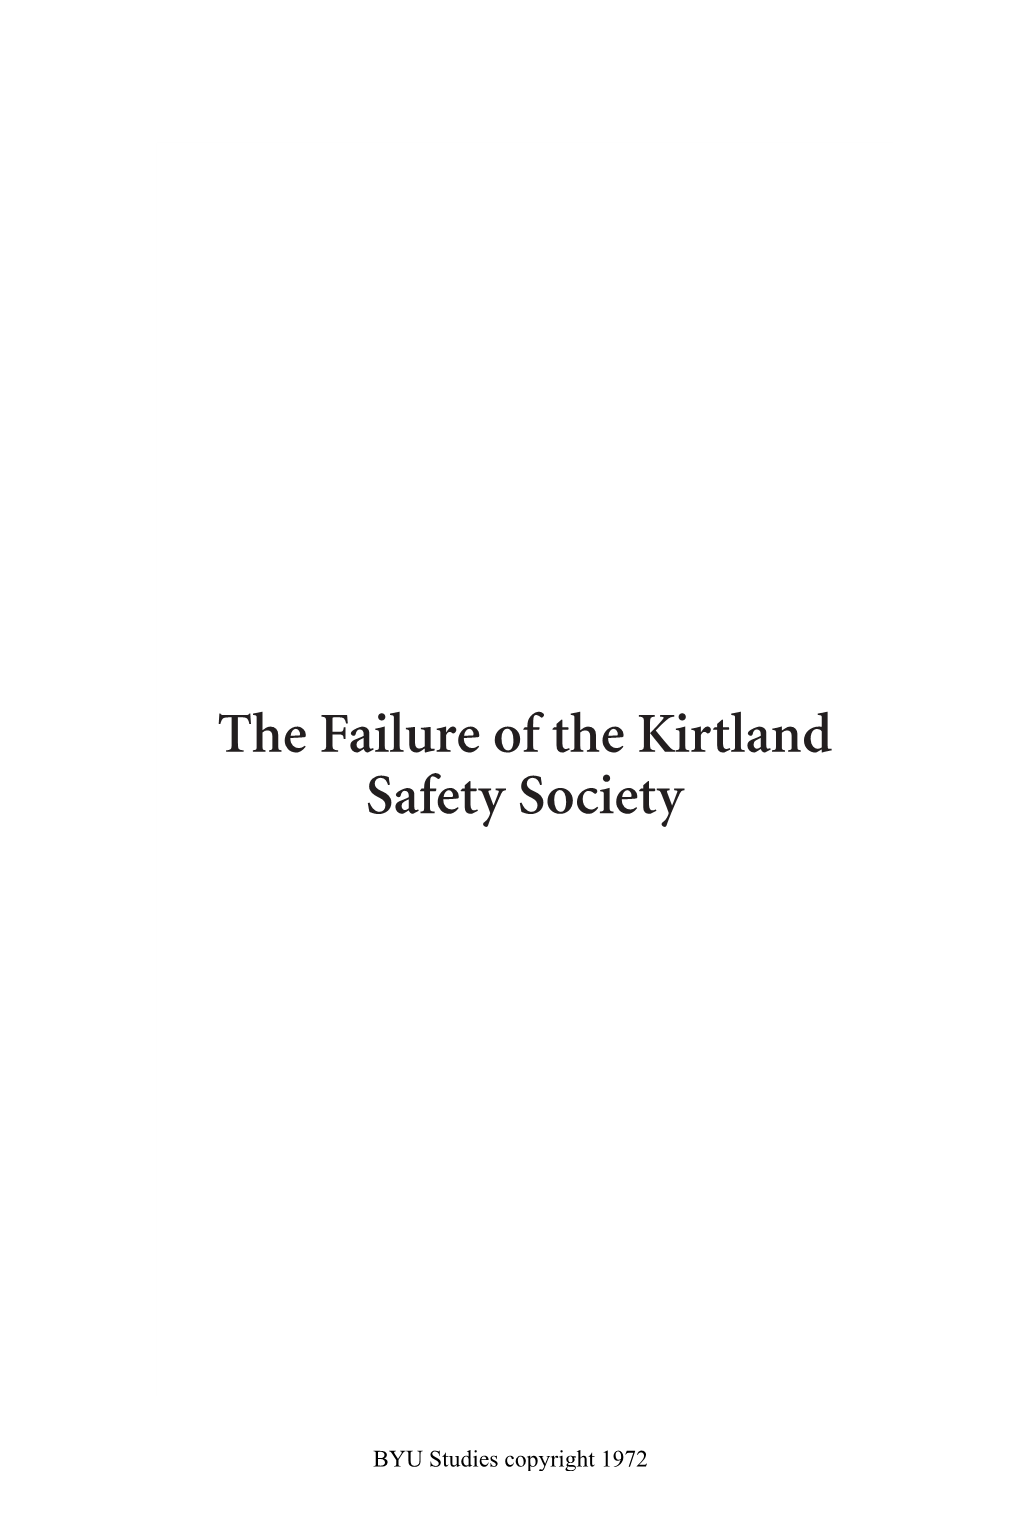 The Failure of the Kirtland Safety Society